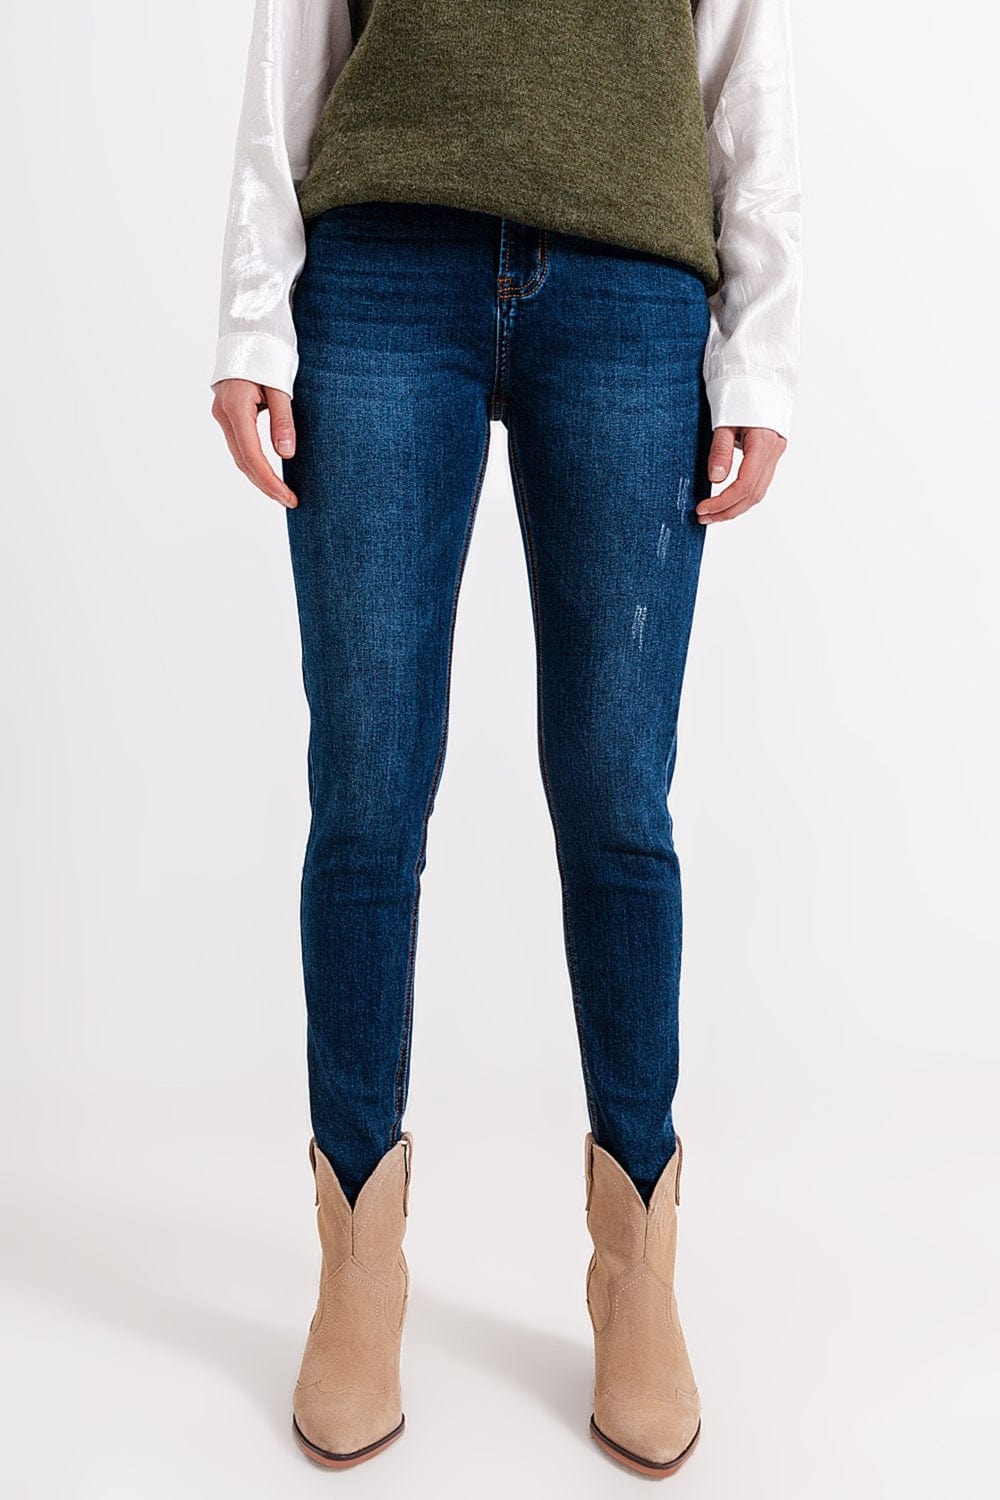 Q2 Jeans High waisted skinny jeans in blue wash